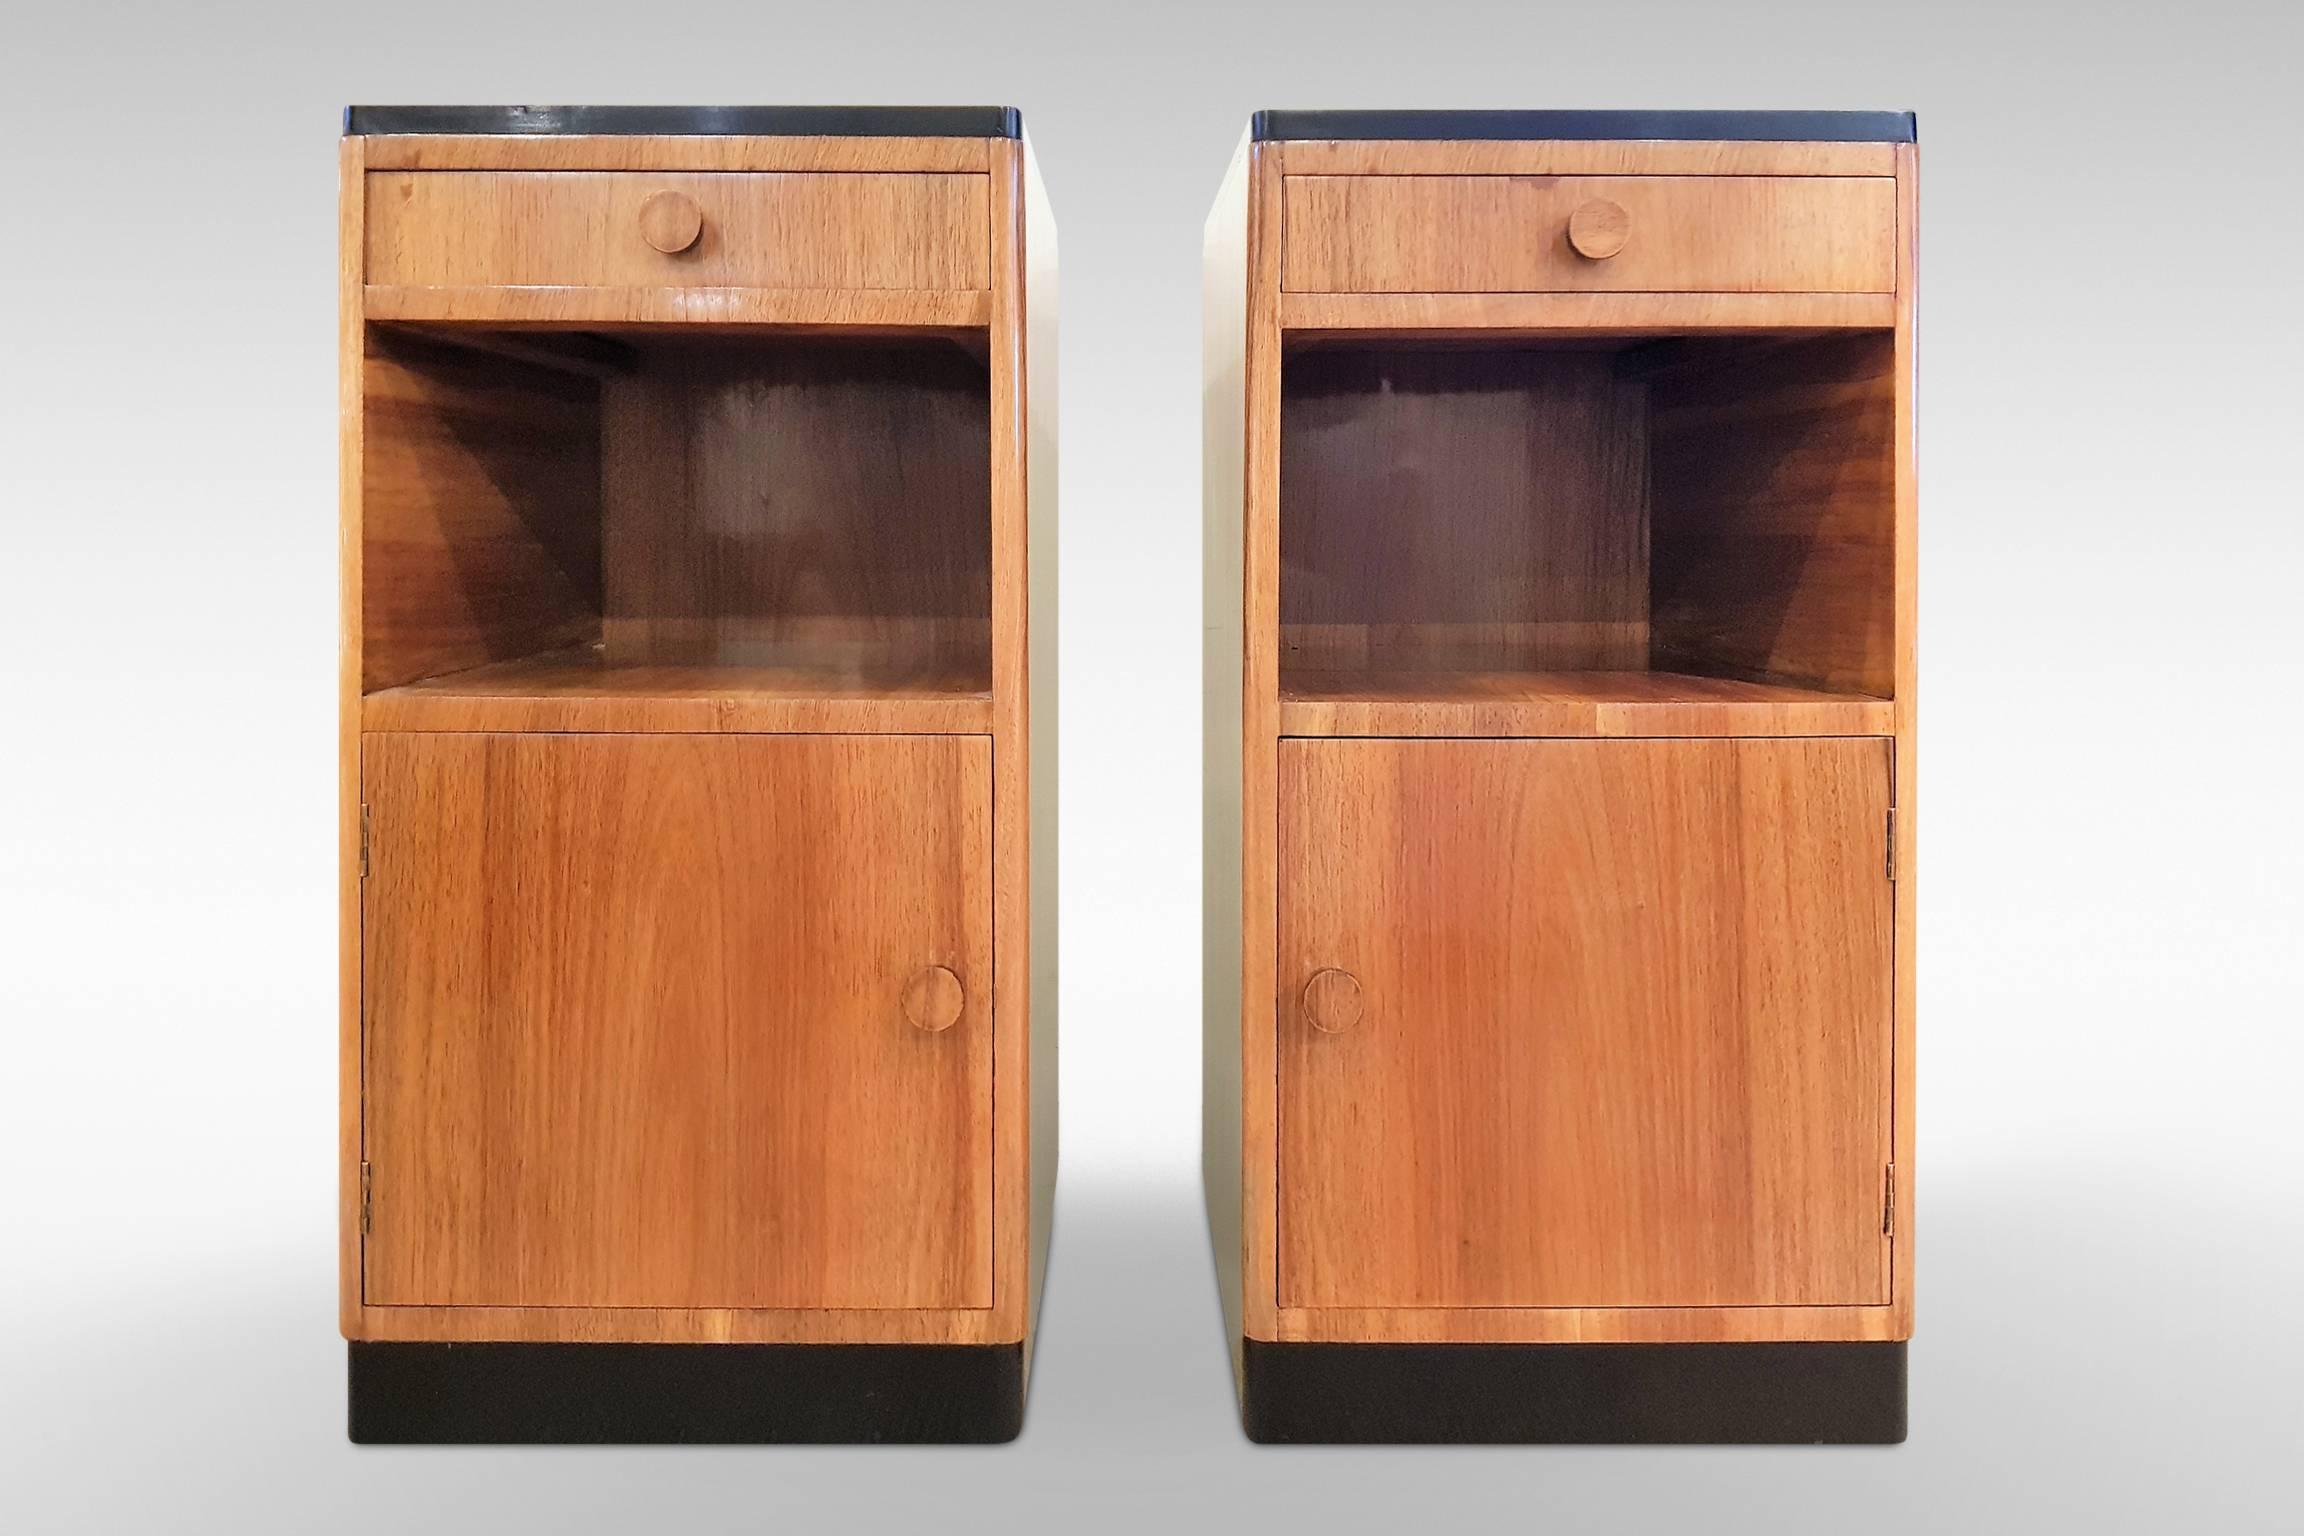 A handsome pair of original Art Deco bedside cabinets in figured and straight grain walnut veneers with ebonized detailing. In a modernist influenced design typical of the mid-late 1930s, these are high quality pieces with handmade dovetail joints